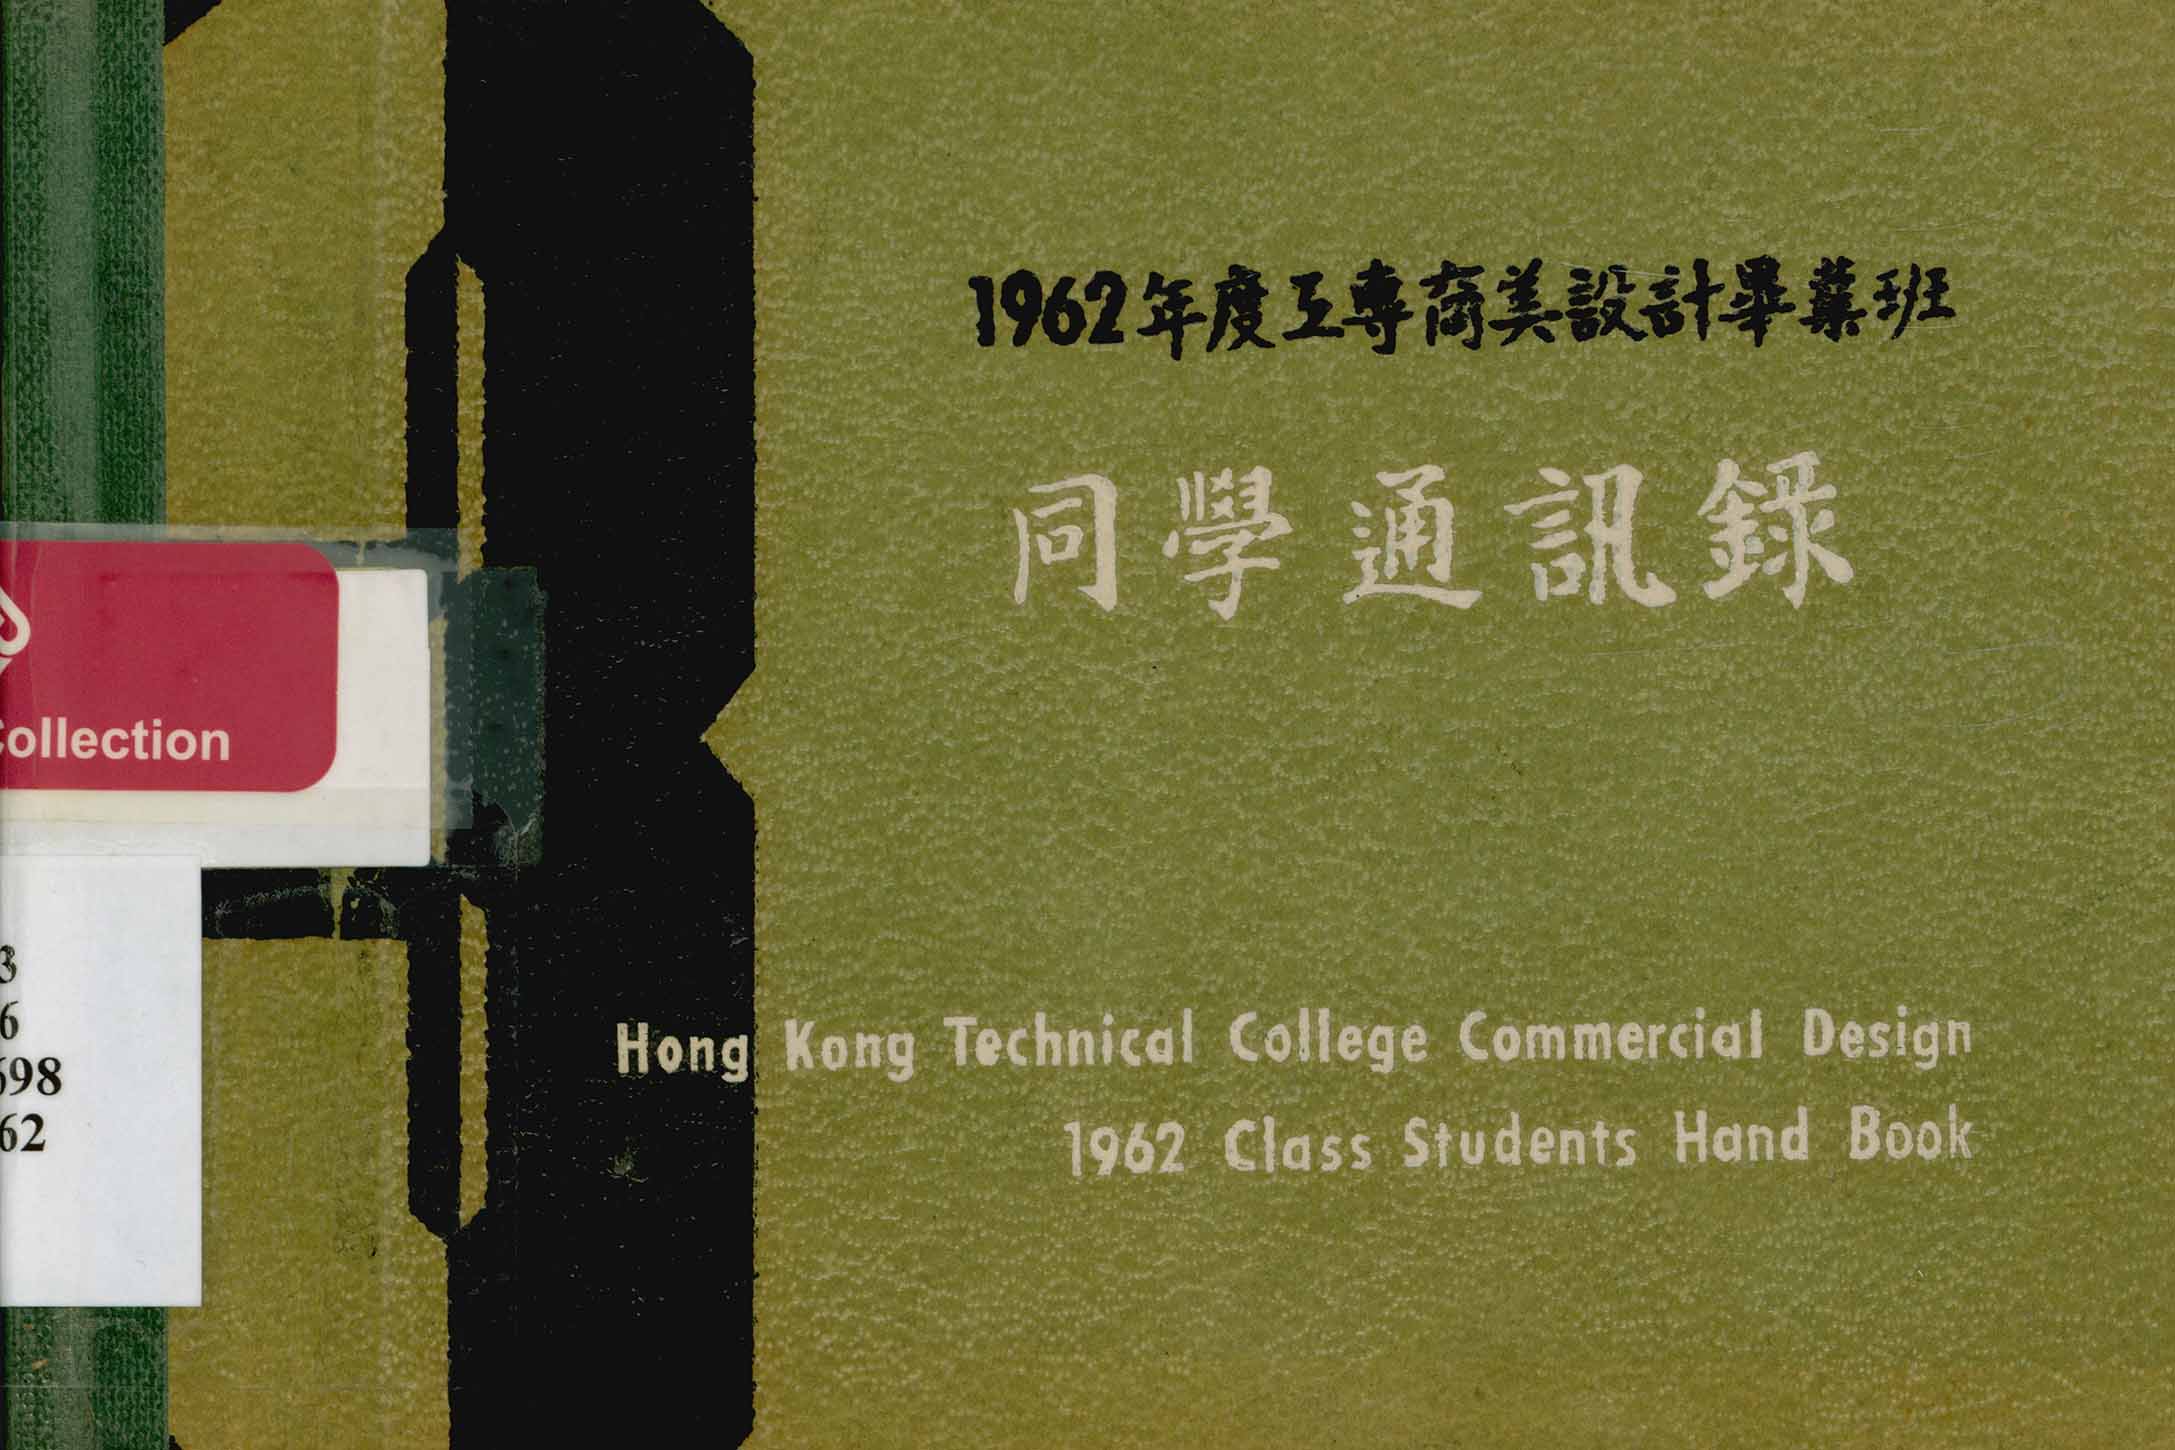 Hong Kong Technical College. Commercial Design. 1962 Class. Students hand book